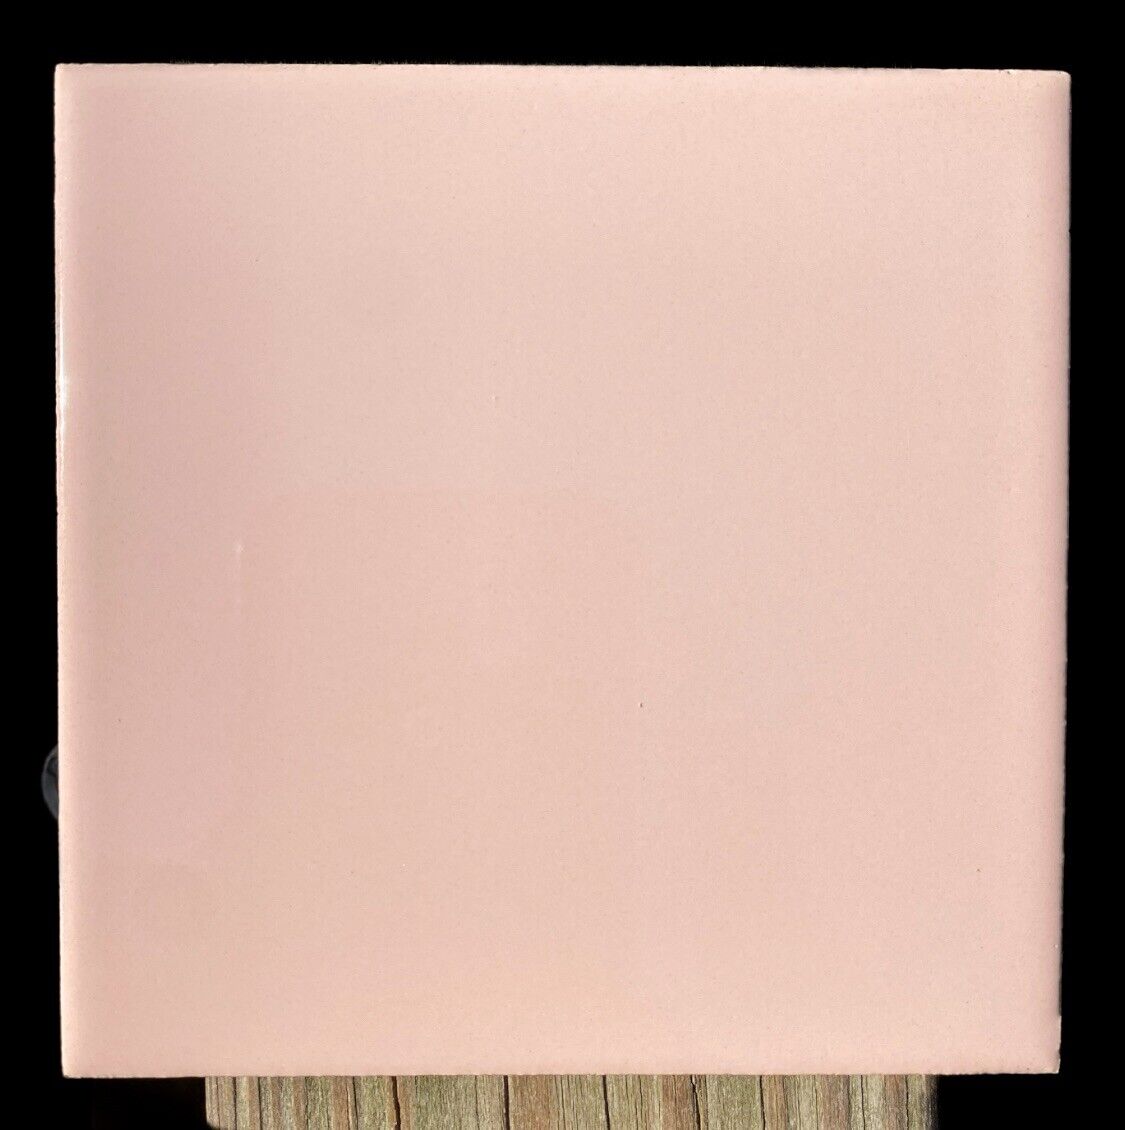 VINTAGE 1953 Pink Wall Tile USQTCO Made In The USA (24) Tiles